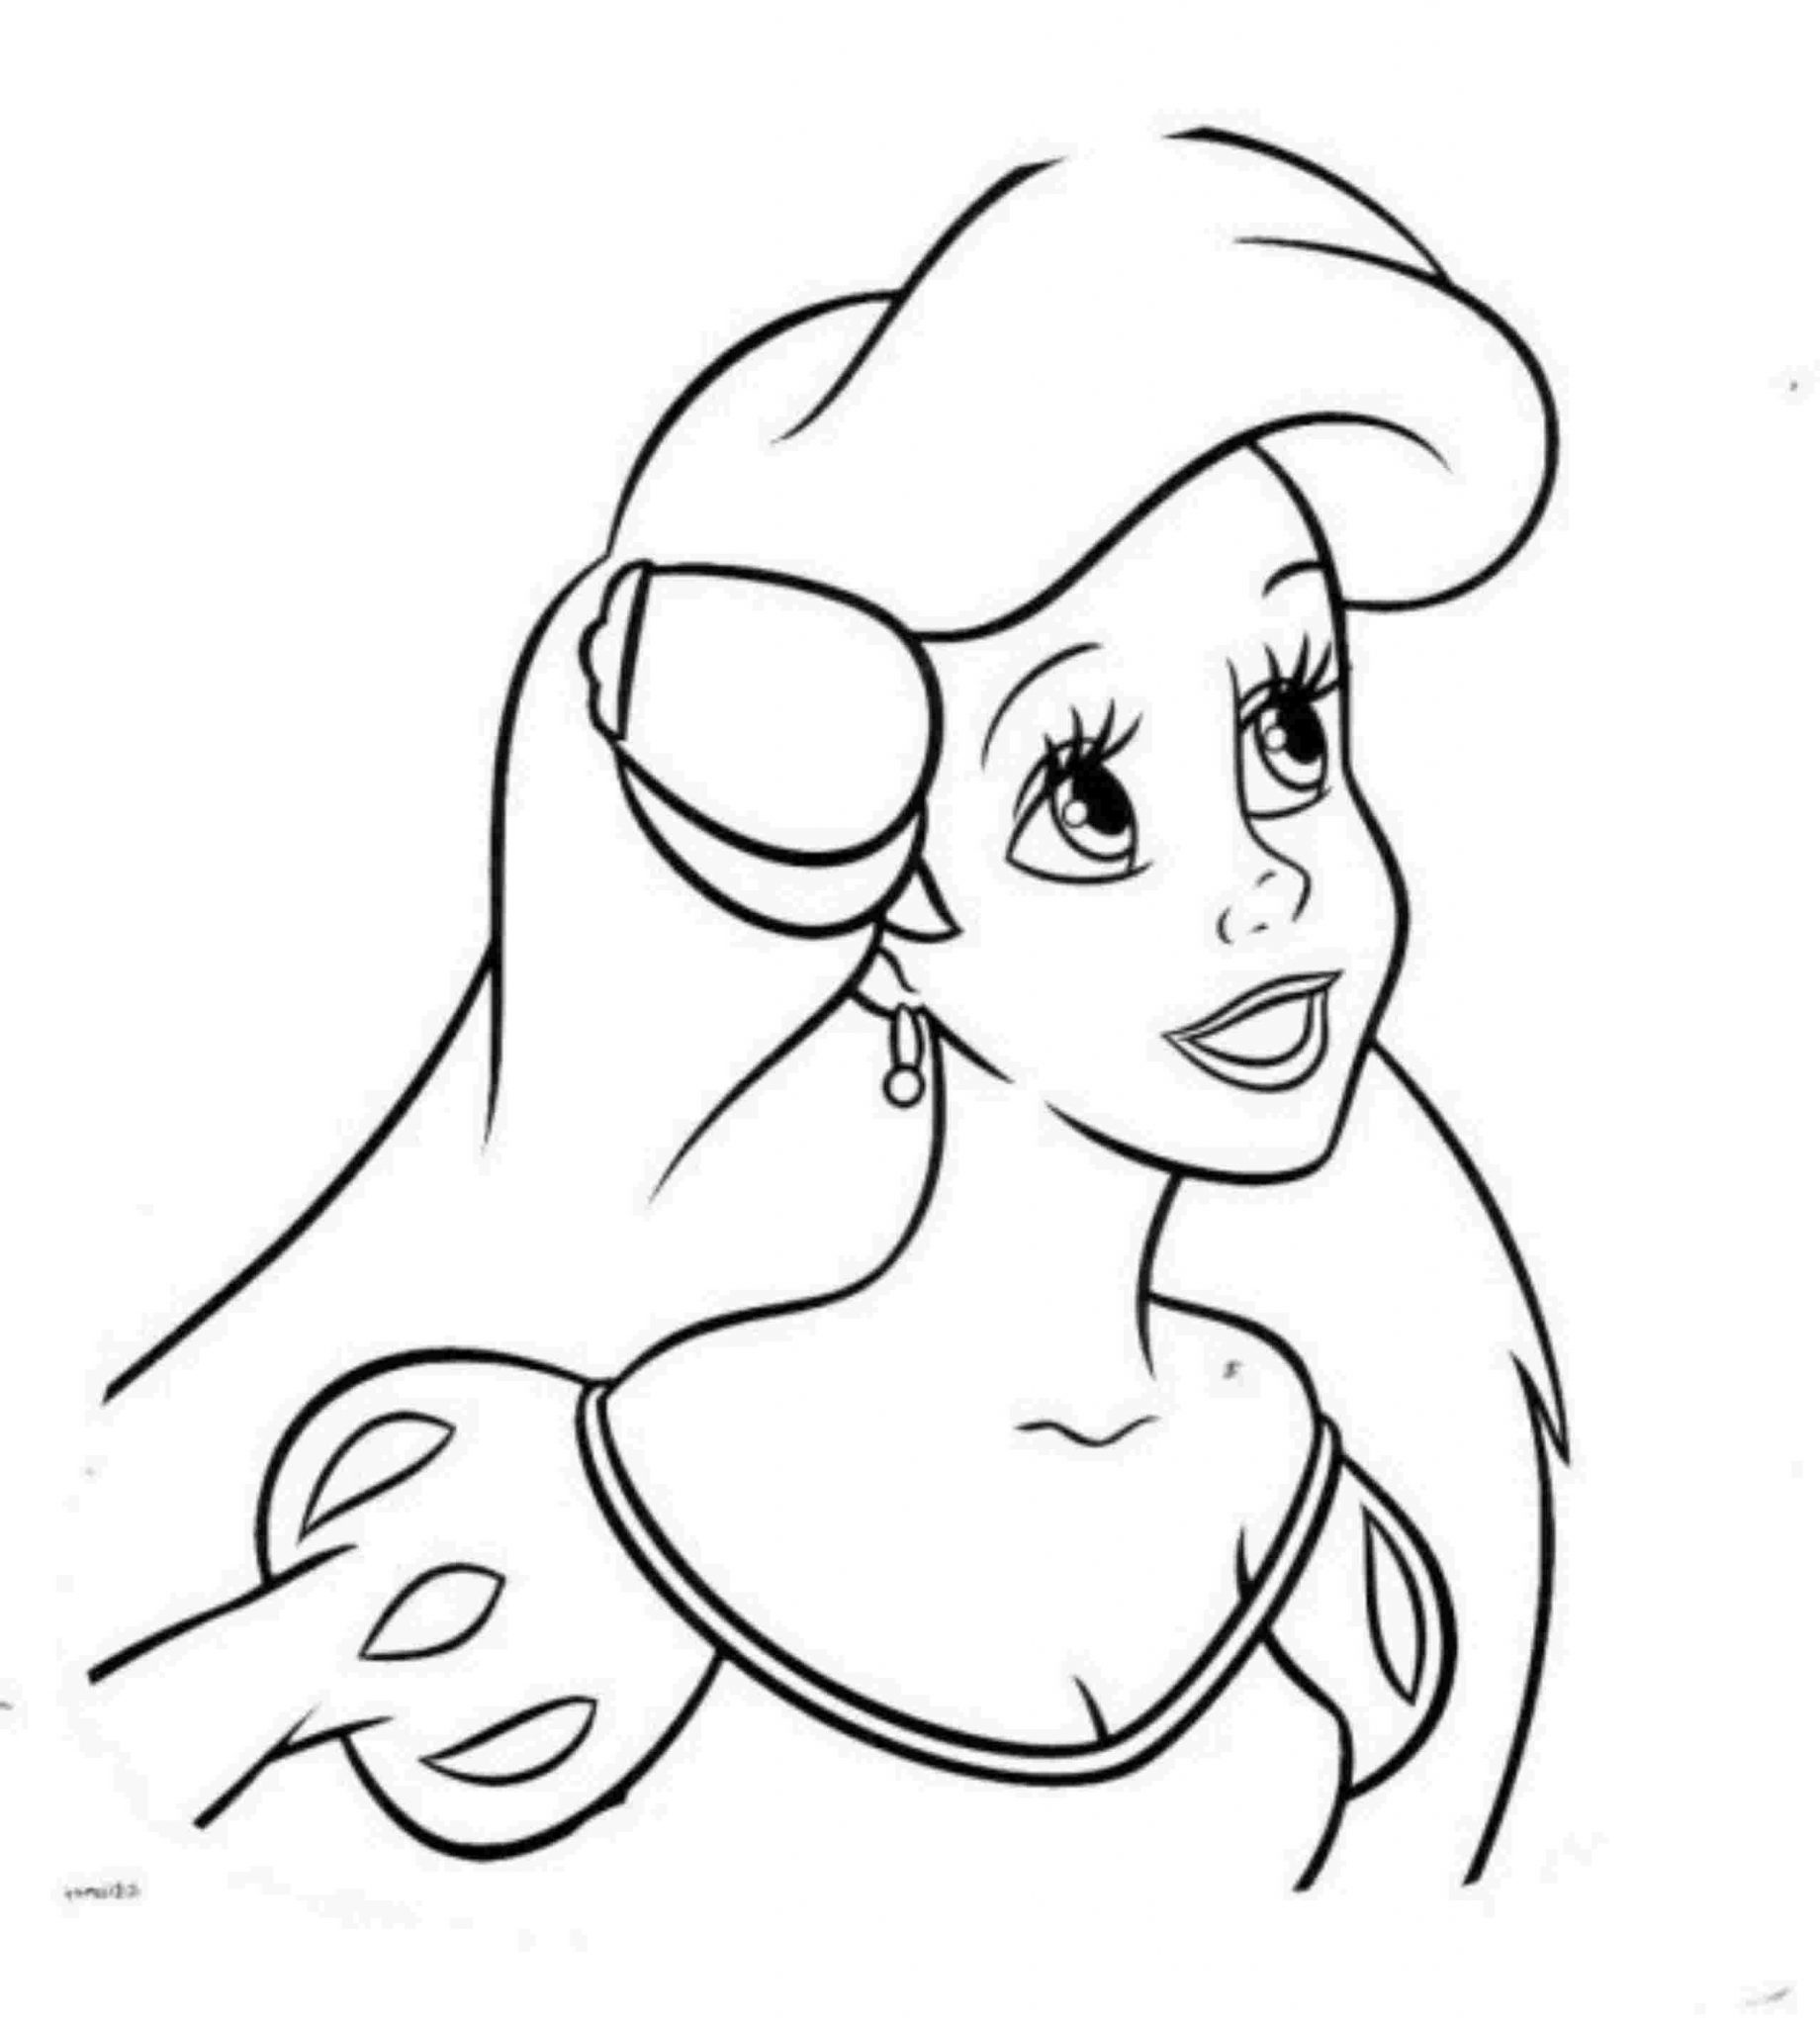 Print & Download - Find the Suitable Little Mermaid ...